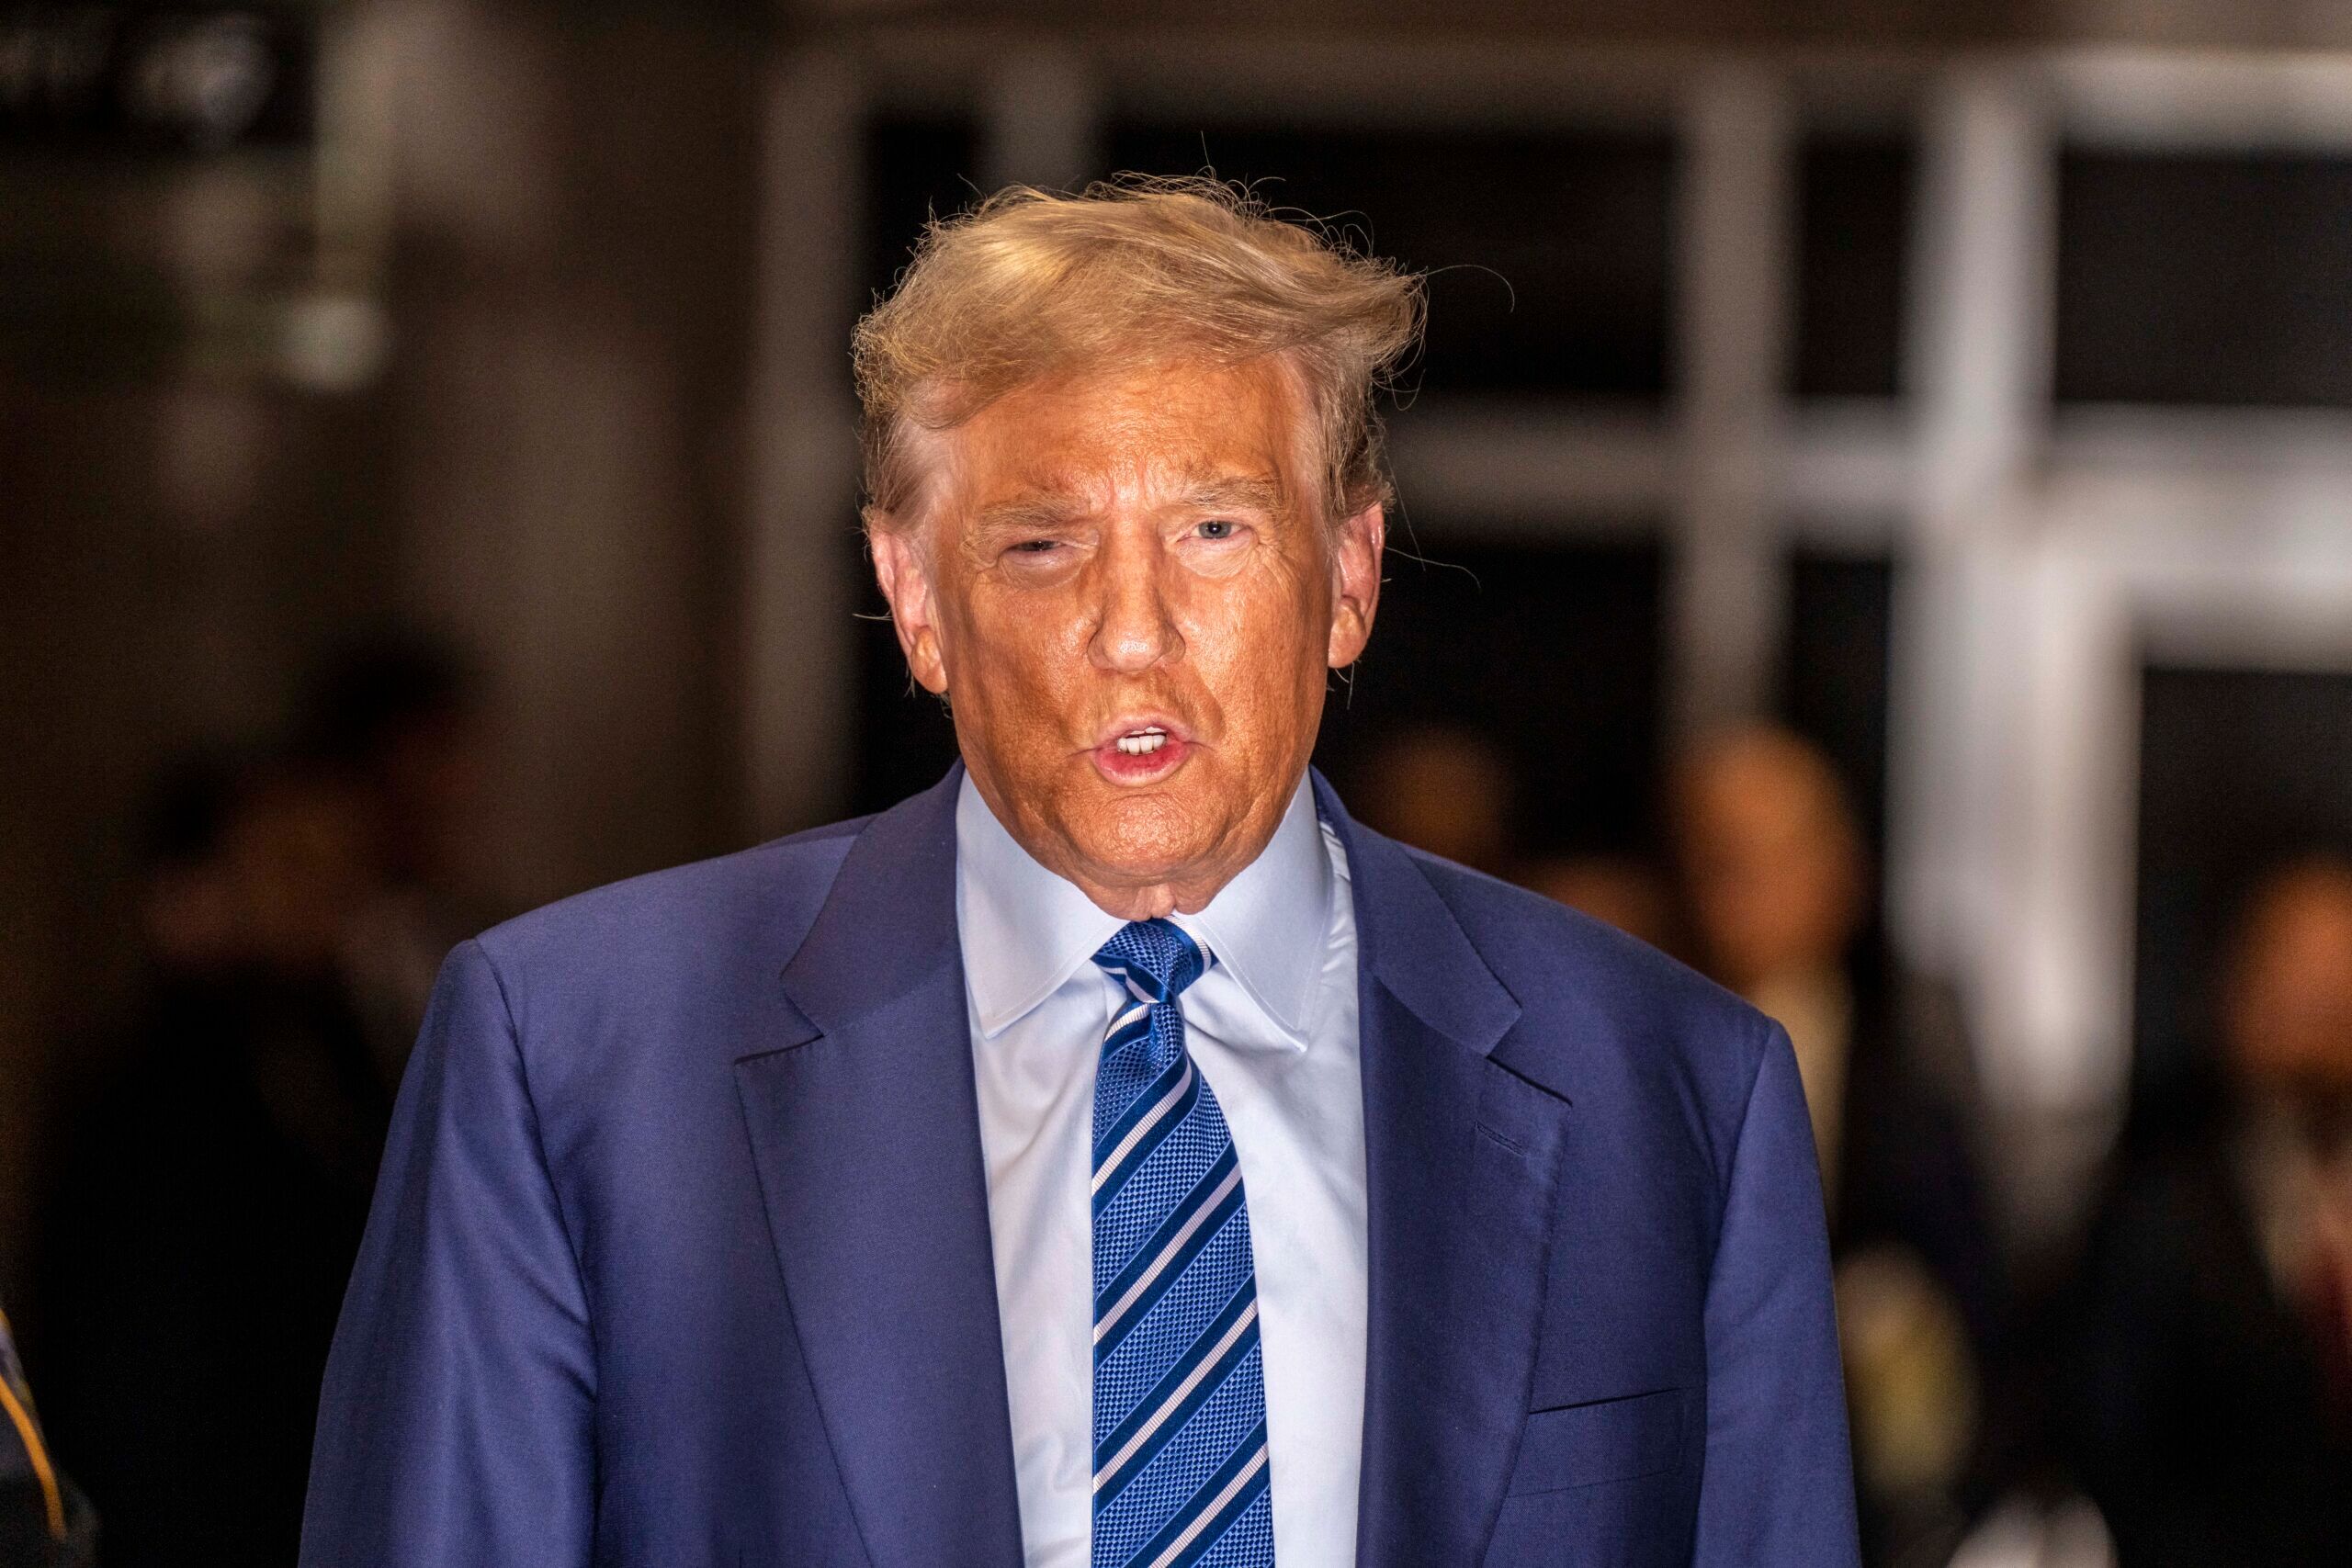 Apr 16, 2024; New York, NY, USA; Former U.S. Former President Donald Trump talks as he leaves court in New York City April 16 2024 , where he is facing felony charges related to a 2016 hush money payment to adult film actress Stormy Daniels. It marks the first time in history that a former U.S. president has been tried on criminal charges. Mandatory Credit: Mark Peterson/Pool via USA TODAY NETWORK